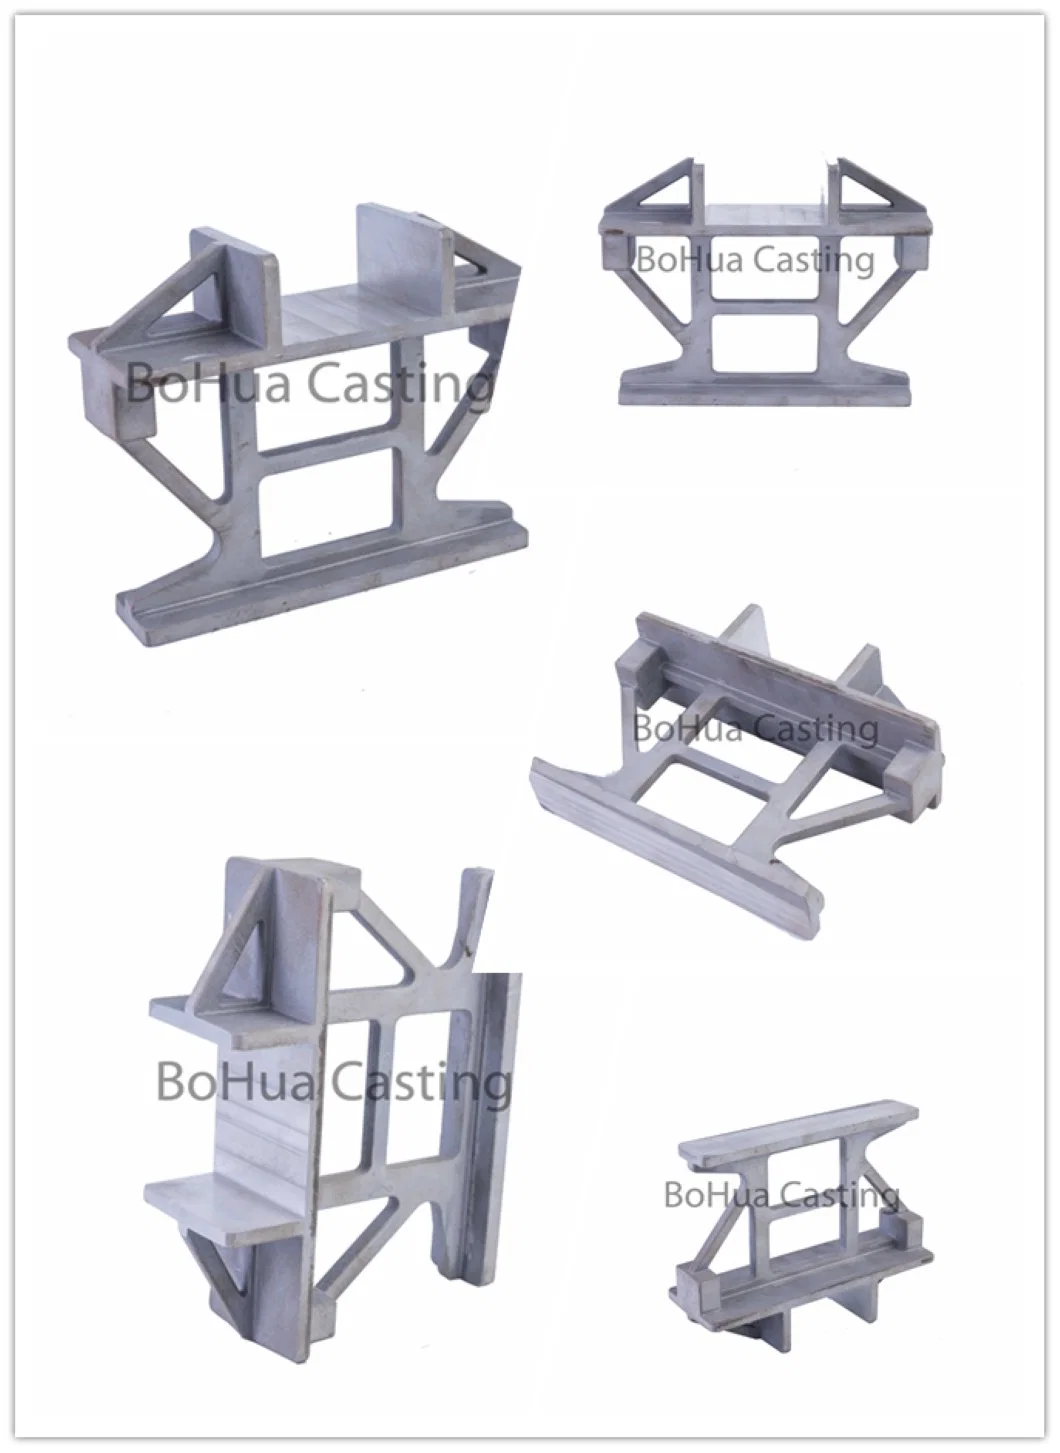 Factory Price Customized Aluminum Alloy Gravity Casting Sand Casting Die Casting CNC Machining Sand Blasting X-ray Testing Machine Aluminum